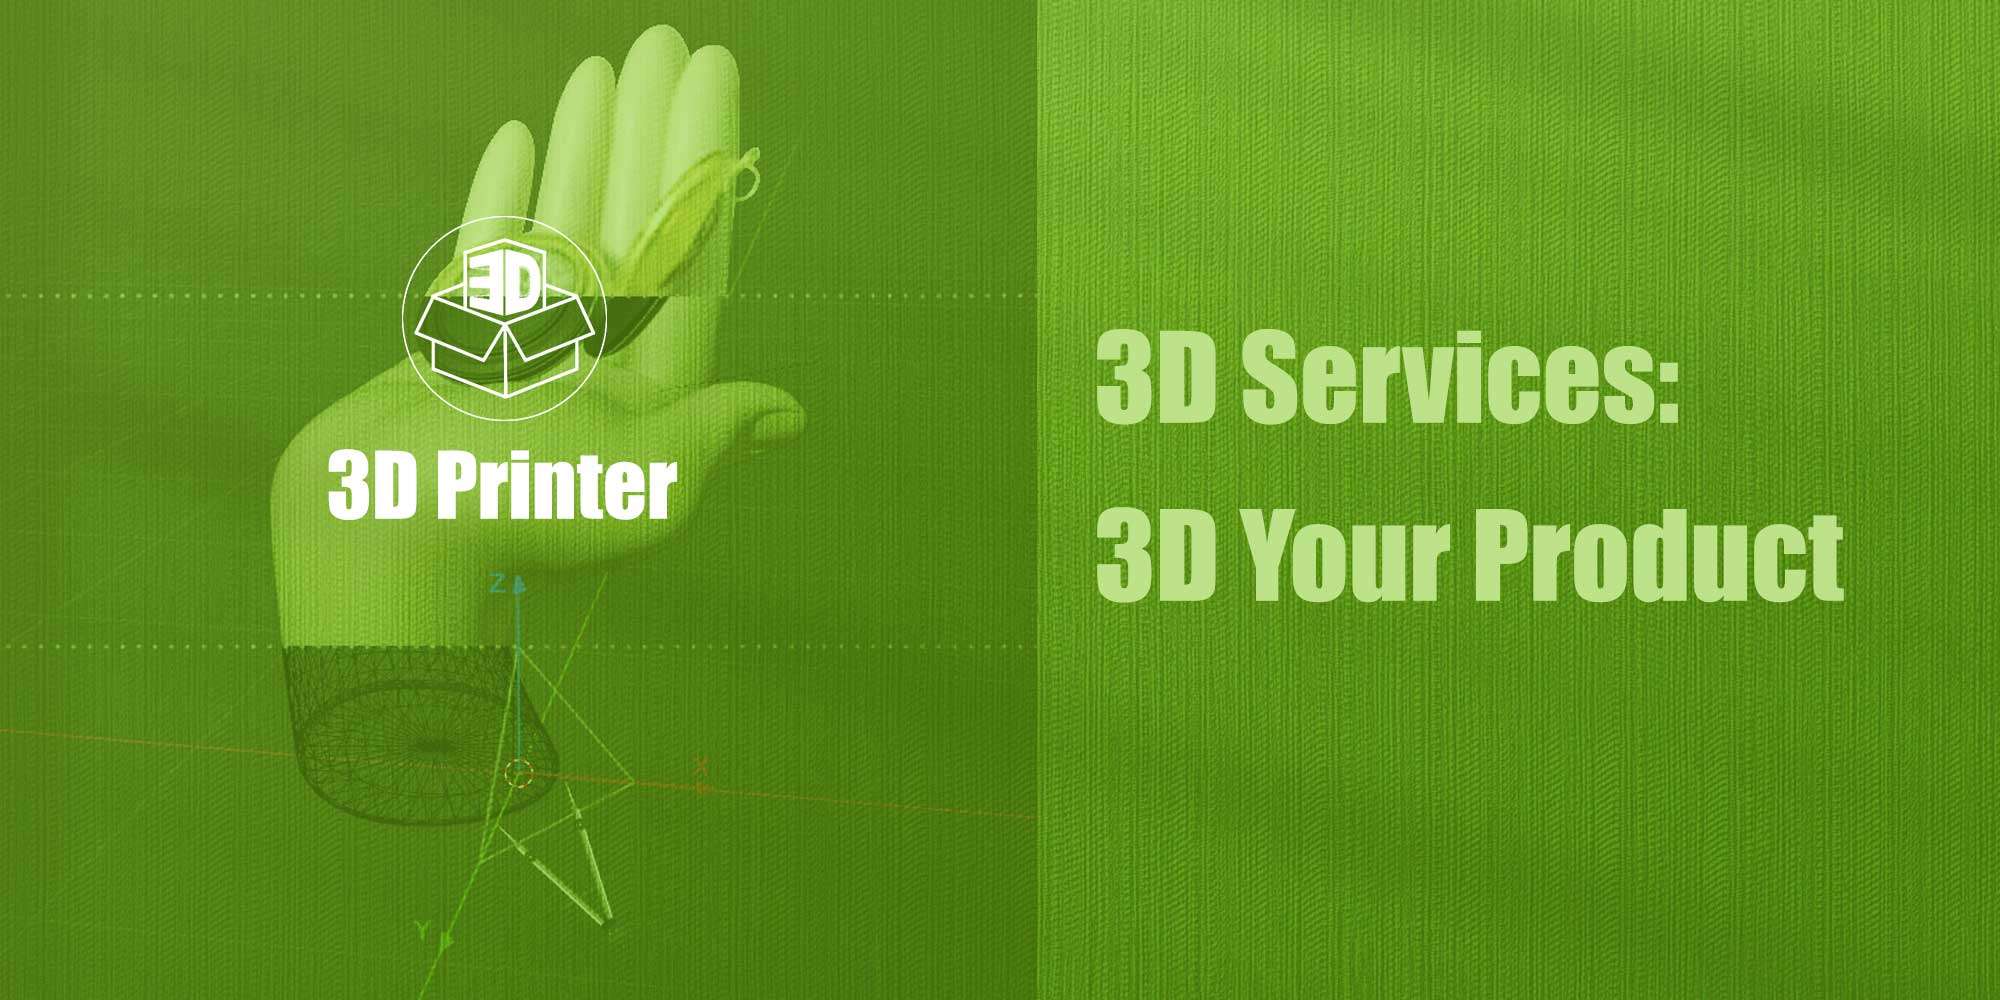 3D-printer-3D-Services-3D-your-Product-business-brand-advertising-smart-presentation